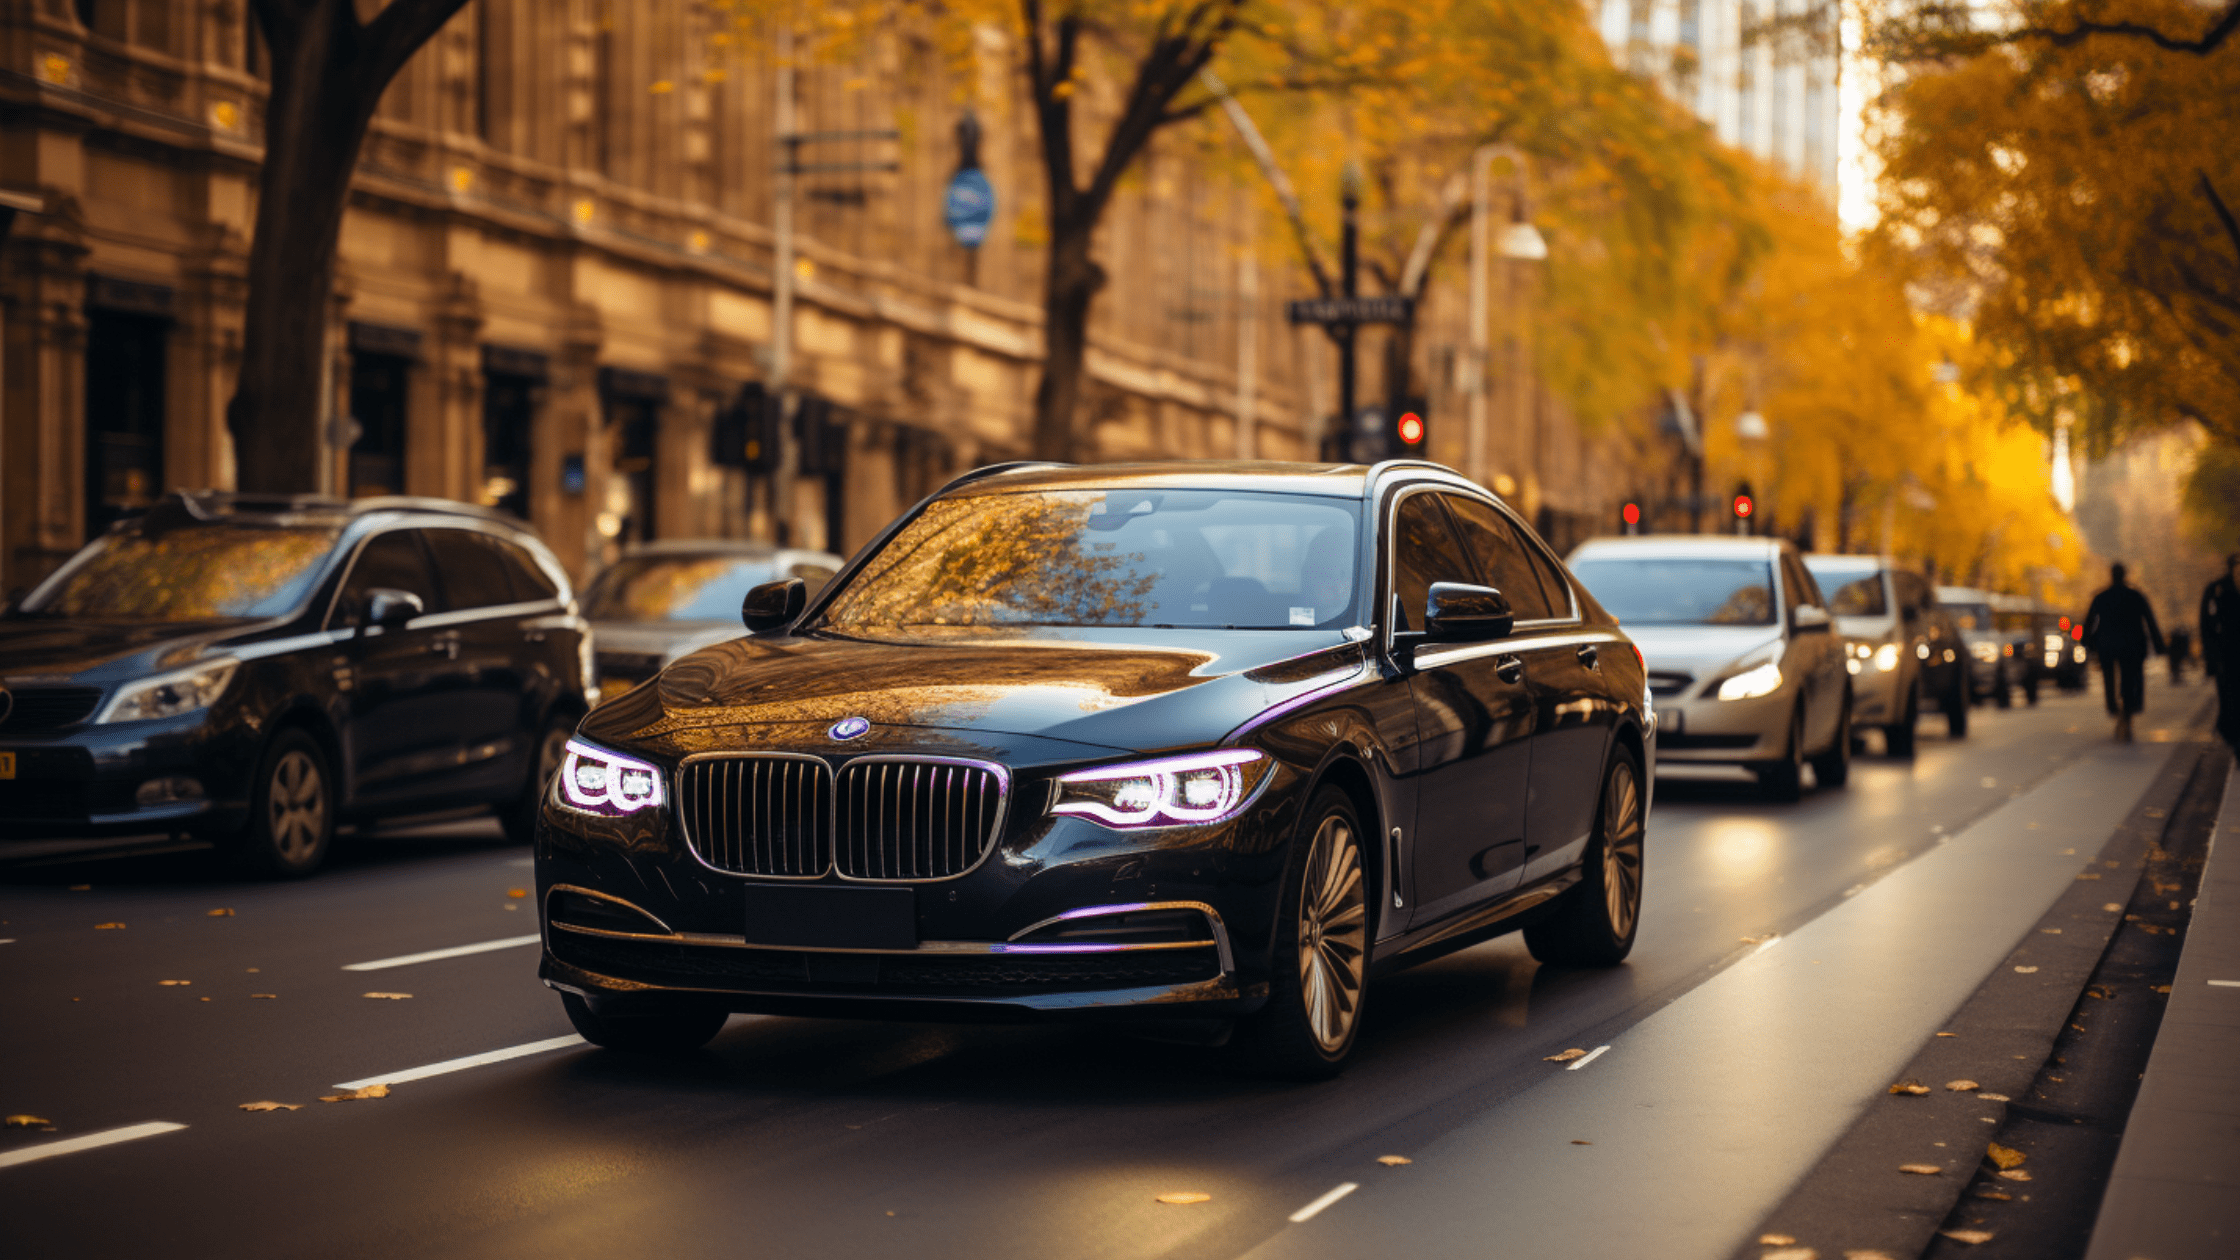 Uber Premier Driving in the City, the car itself is a BMW 7 series